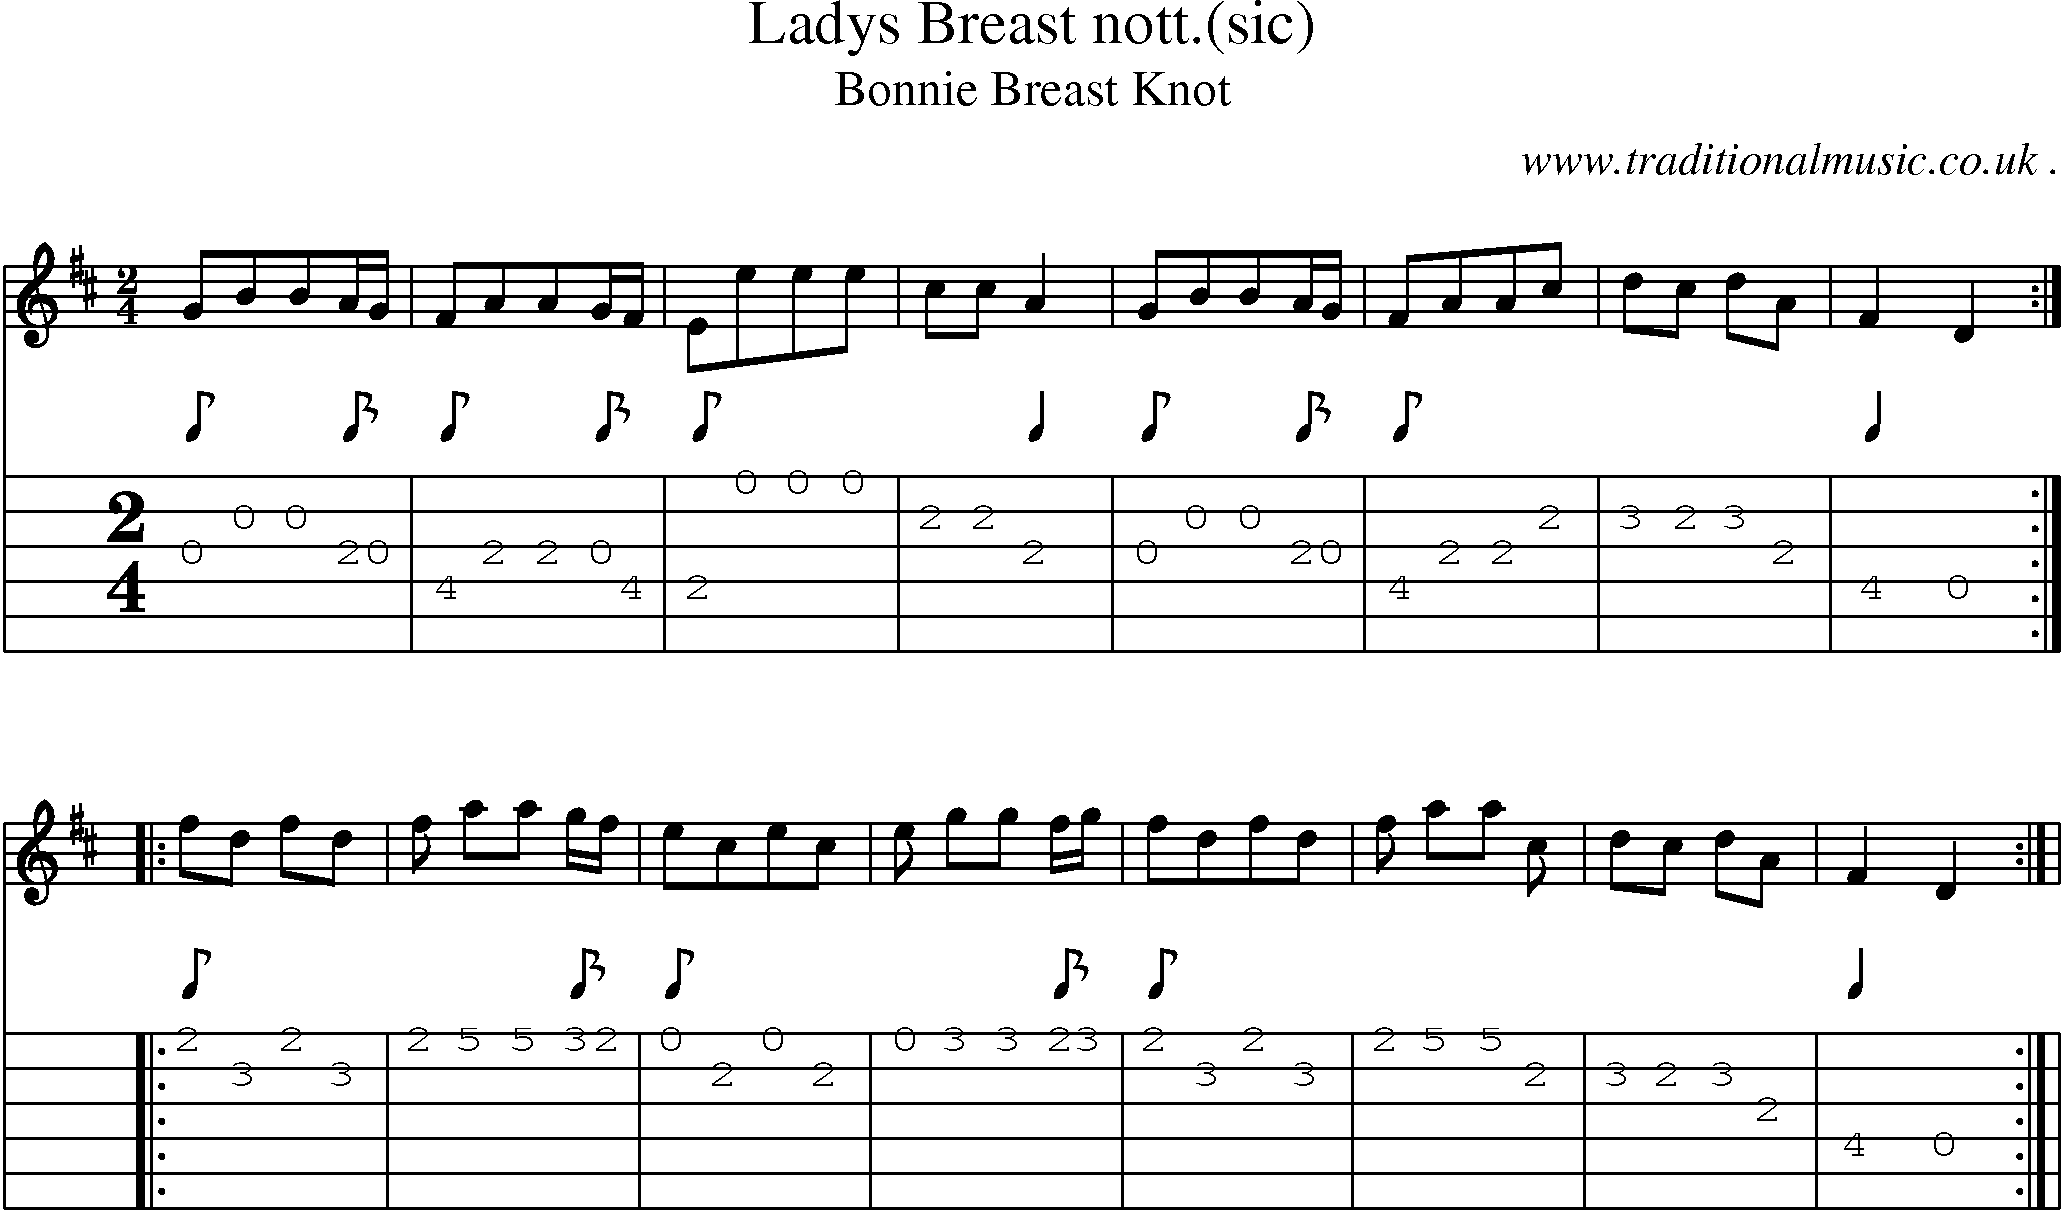 Sheet-Music and Guitar Tabs for Ladys Breast Nott(sic)